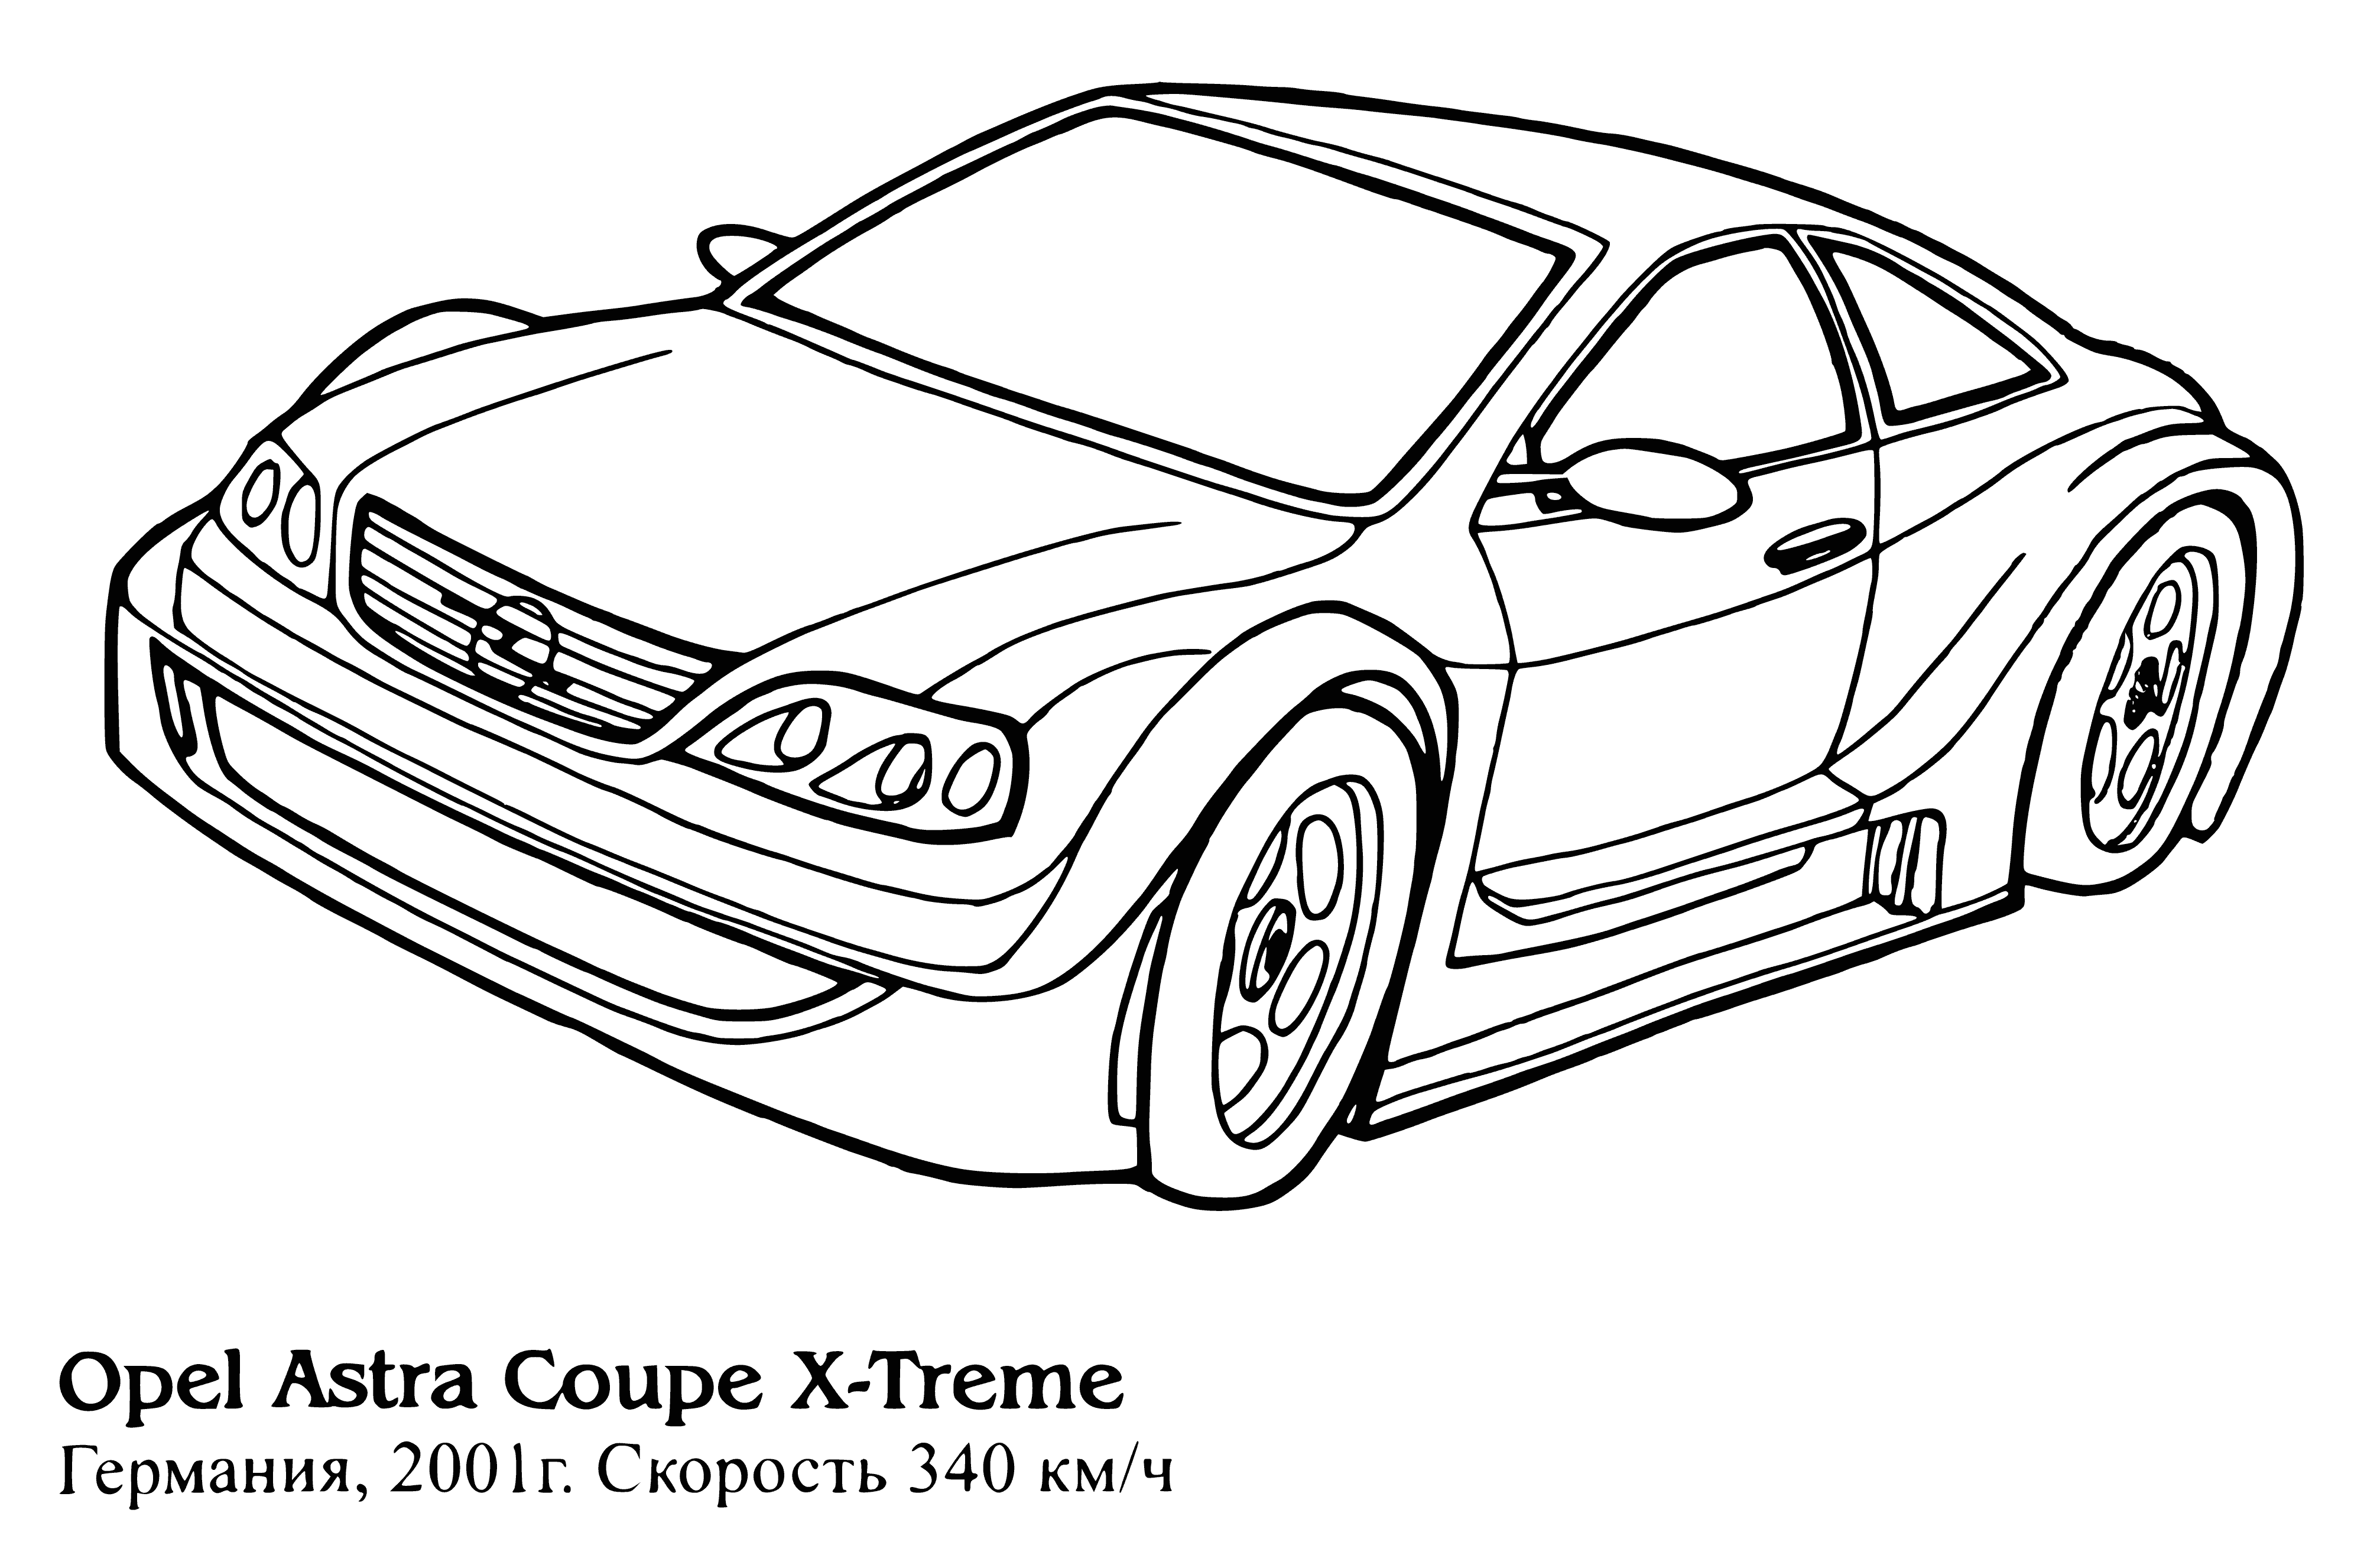 Opel Astra Coupe X-Treme coloring page